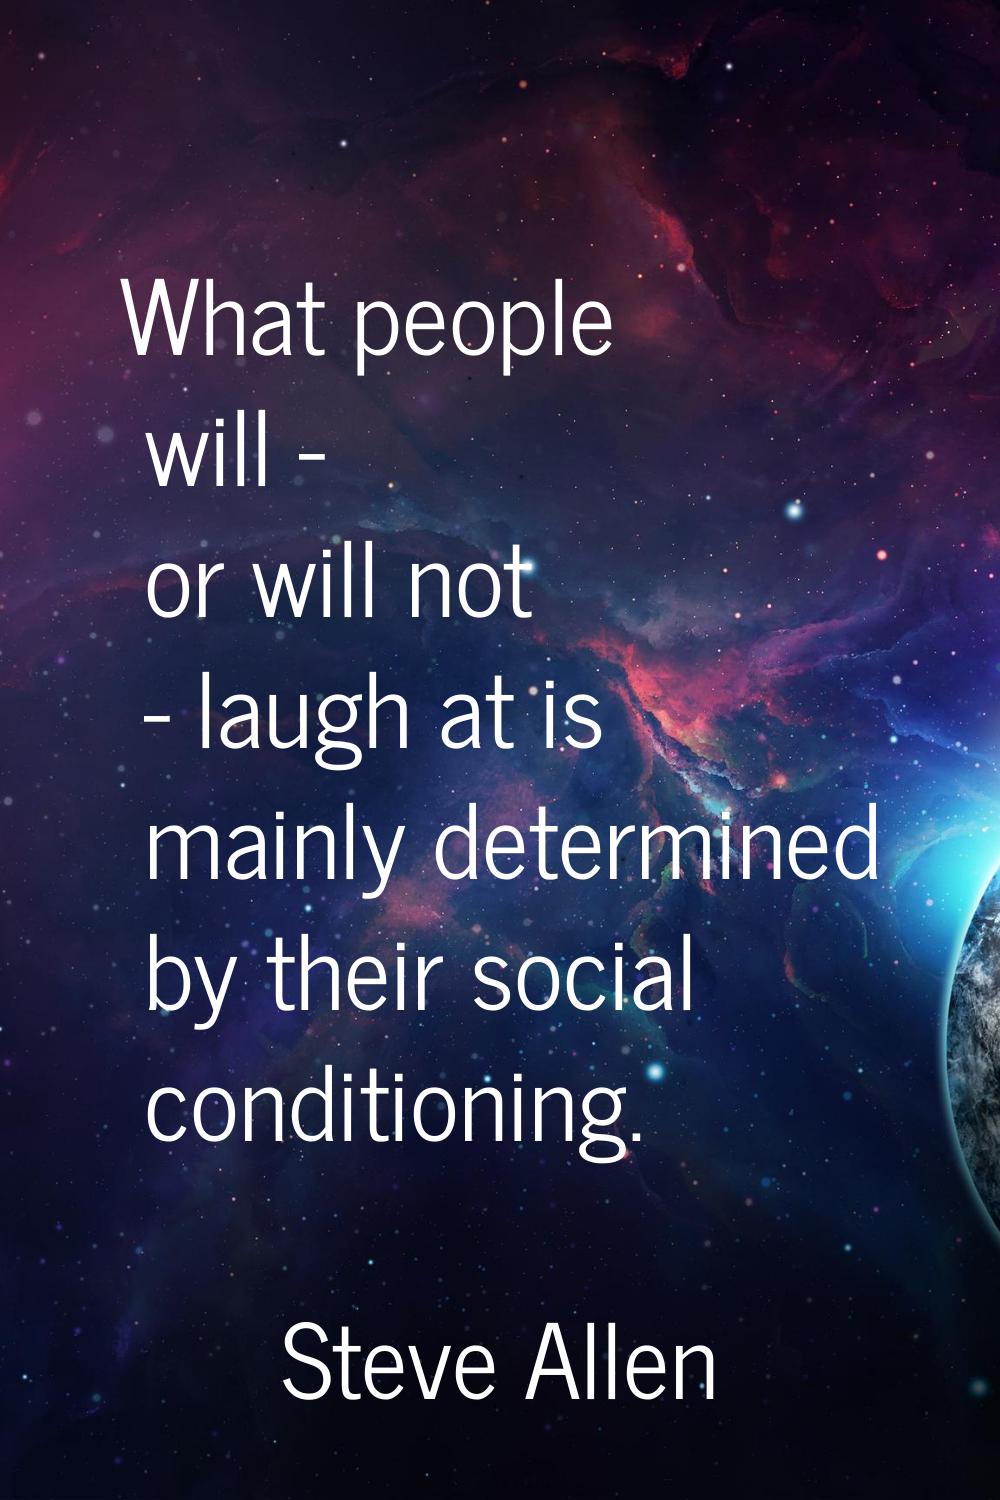 What people will - or will not - laugh at is mainly determined by their social conditioning.